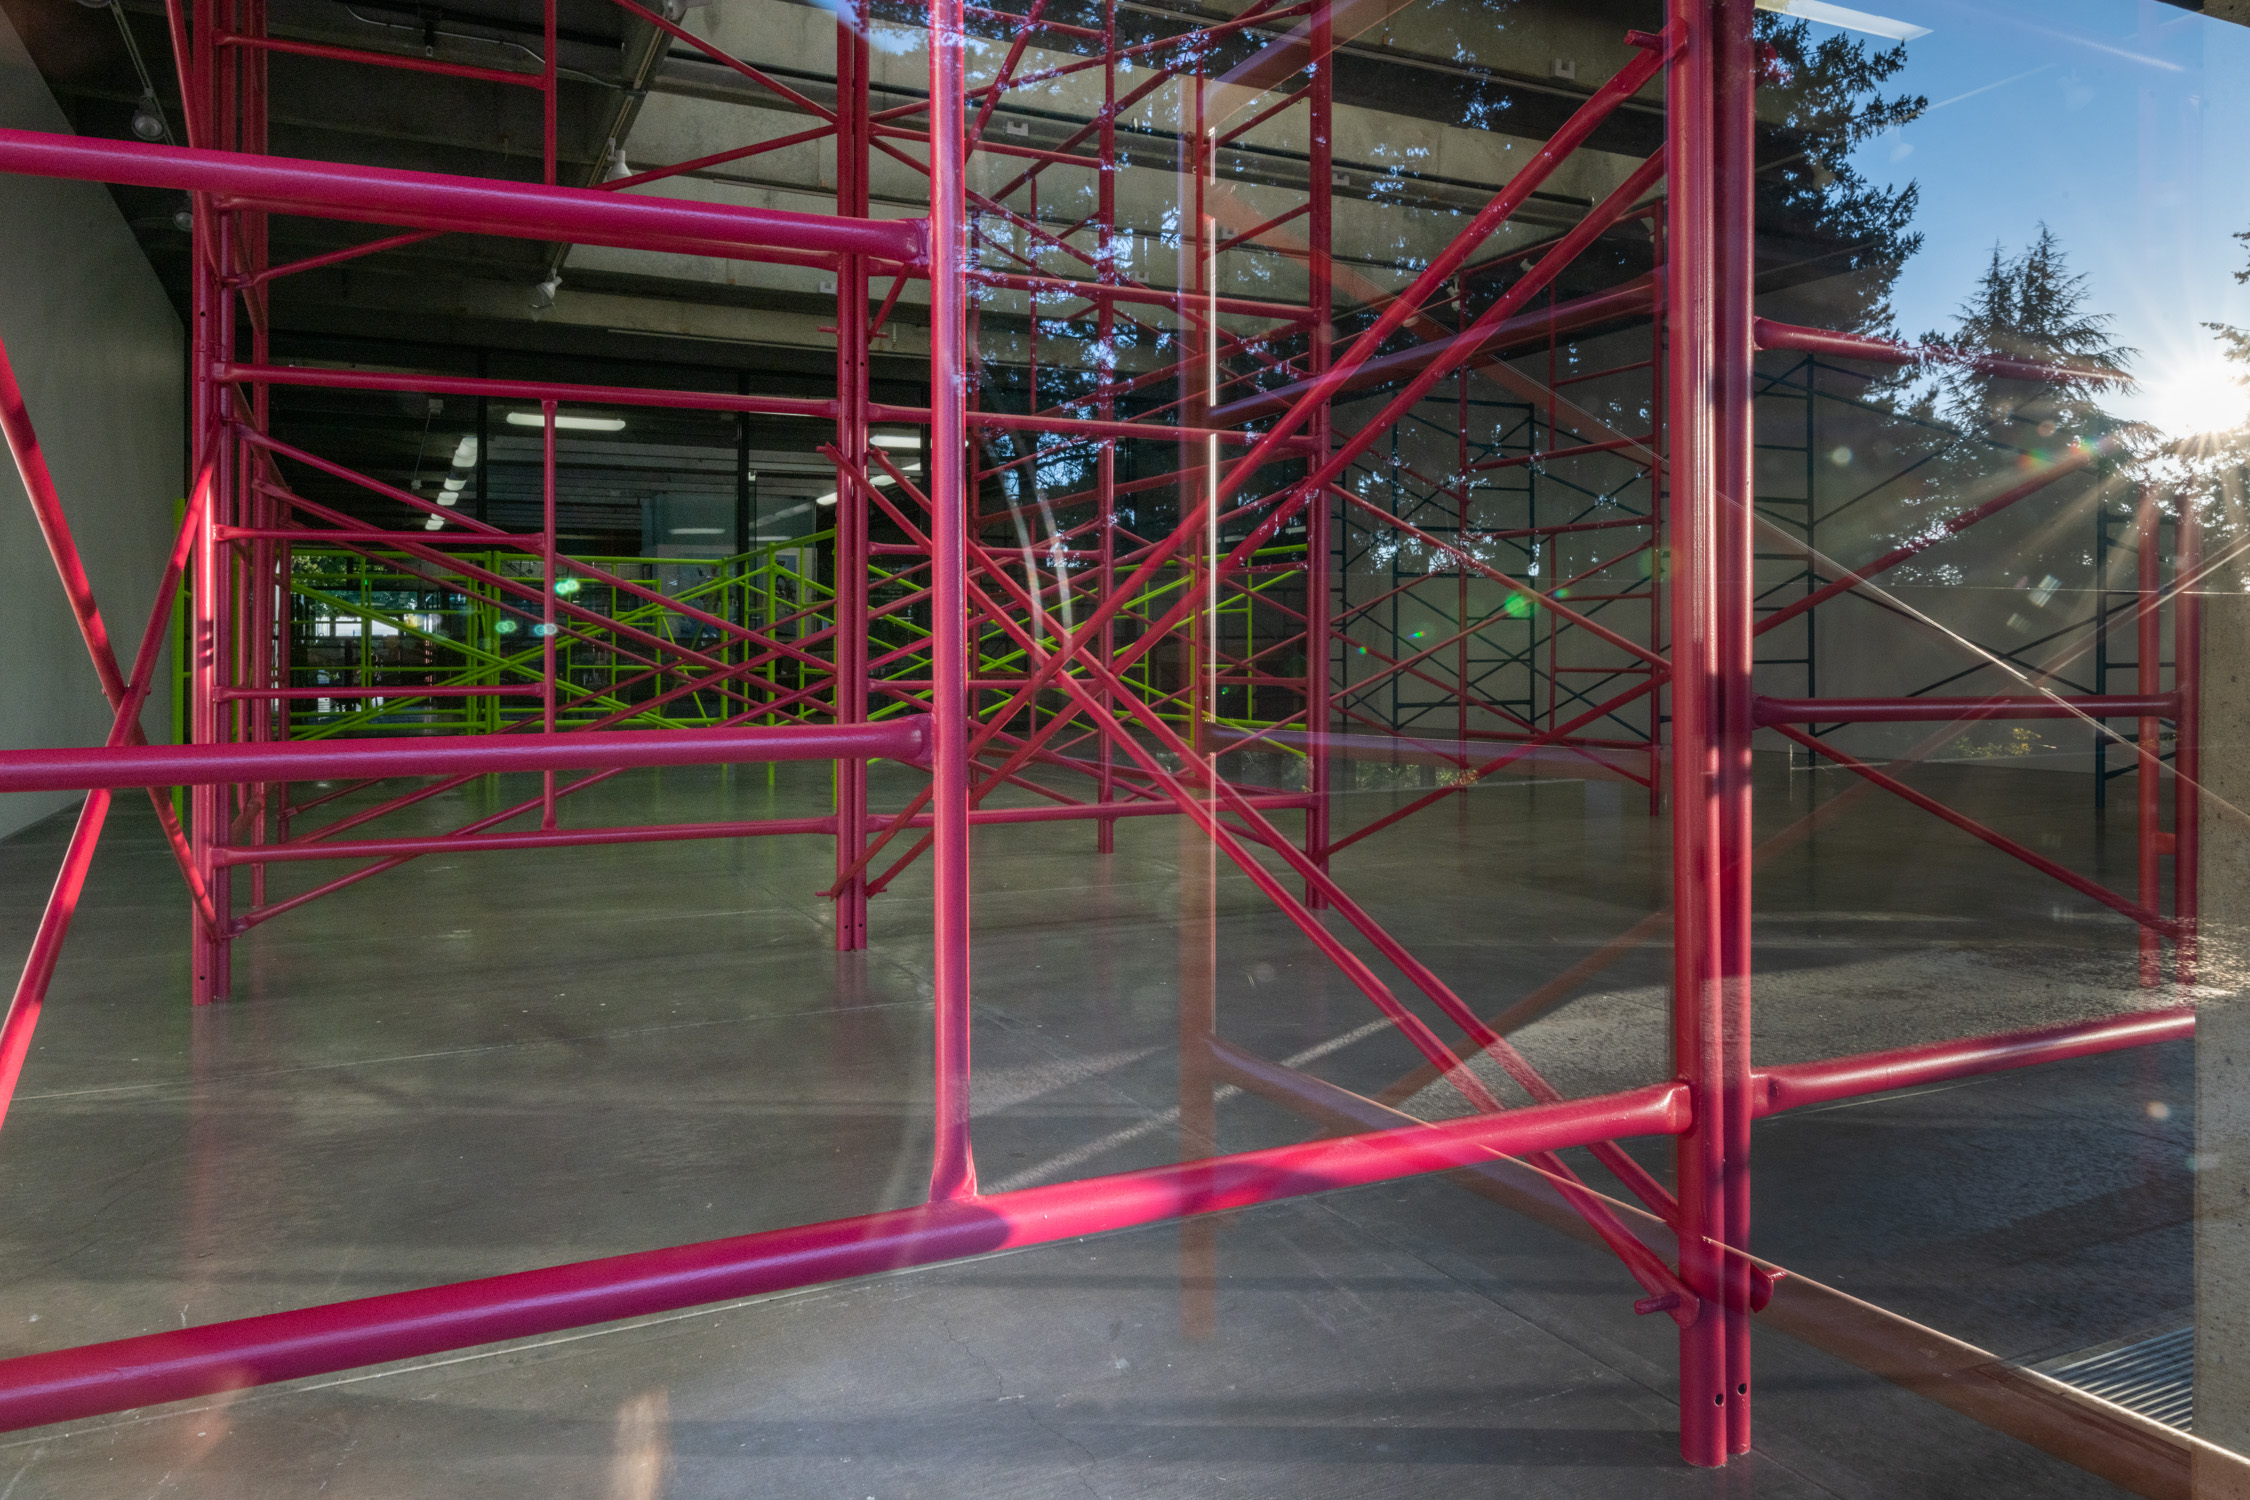 View into the gallery with pink and green scaffolding.